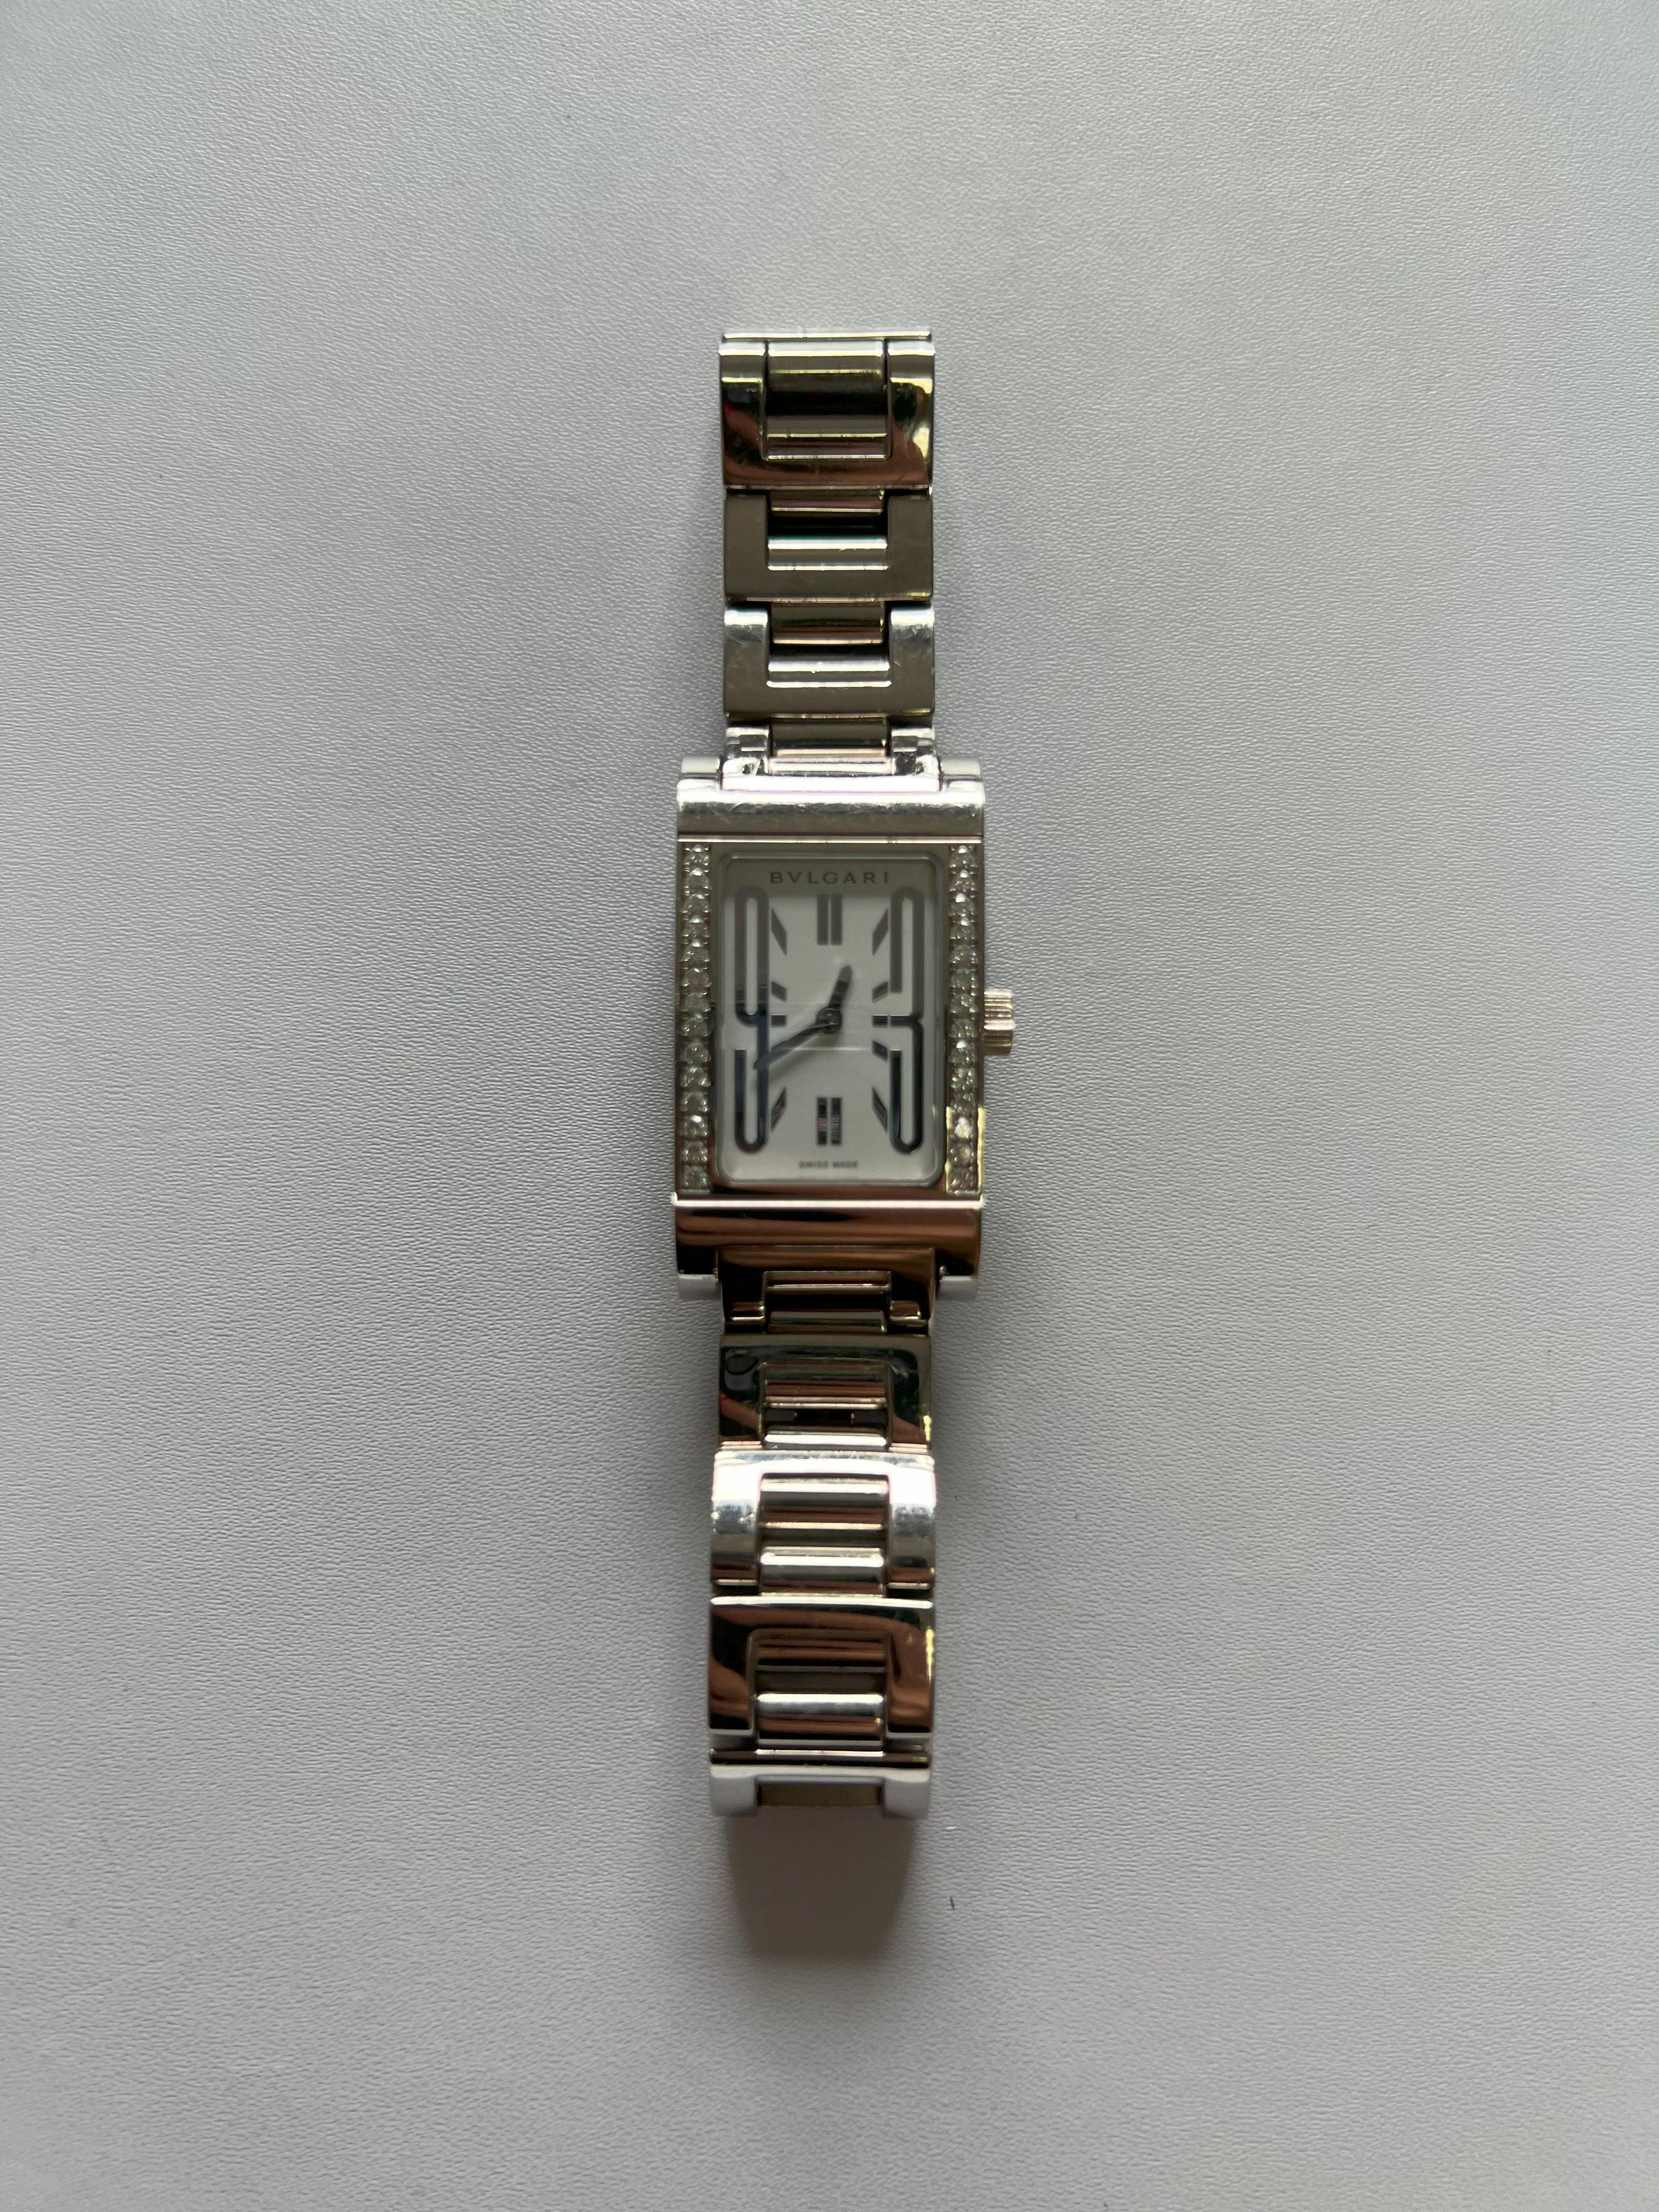 Bvlgari Assioma Watch - 18K White Gold - 7 inches length - 113 Grams
Pre-Owned
Great Condition
Quartz Movement
Back Dial has 3 hallmarks, OR, 750, 18K, BVLGARI, Rettangolo, RT W39 G, L668
Please see all photos and videos attached for it 